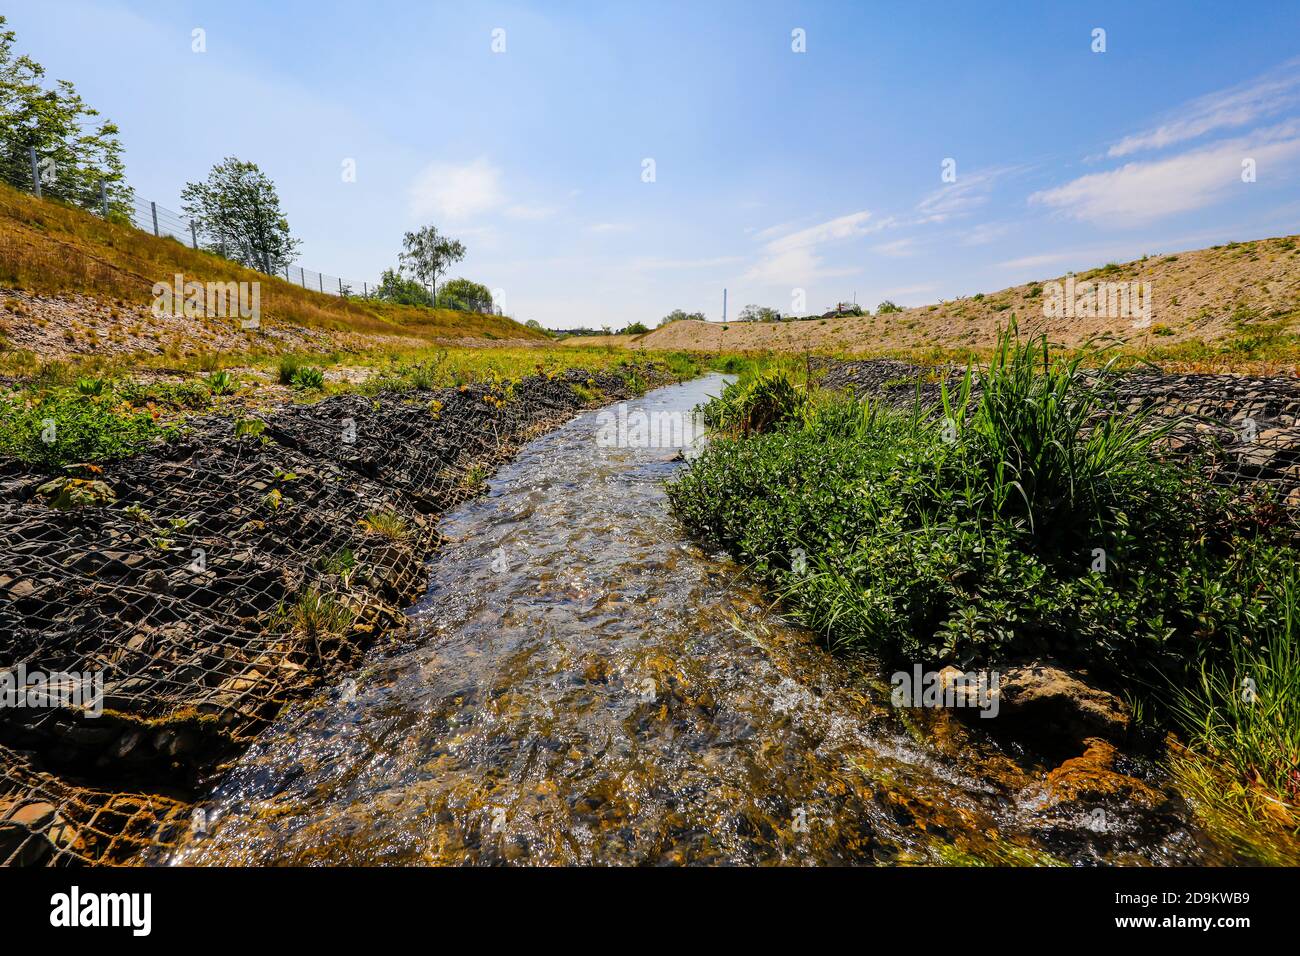 Renatured flowing water, the Hellbach belongs to the Emscher river system, was previously an open, above-ground wastewater channel, Emscher conversion, Recklinghausen, Ruhr area, North Rhine-Westphalia, Germany Stock Photo